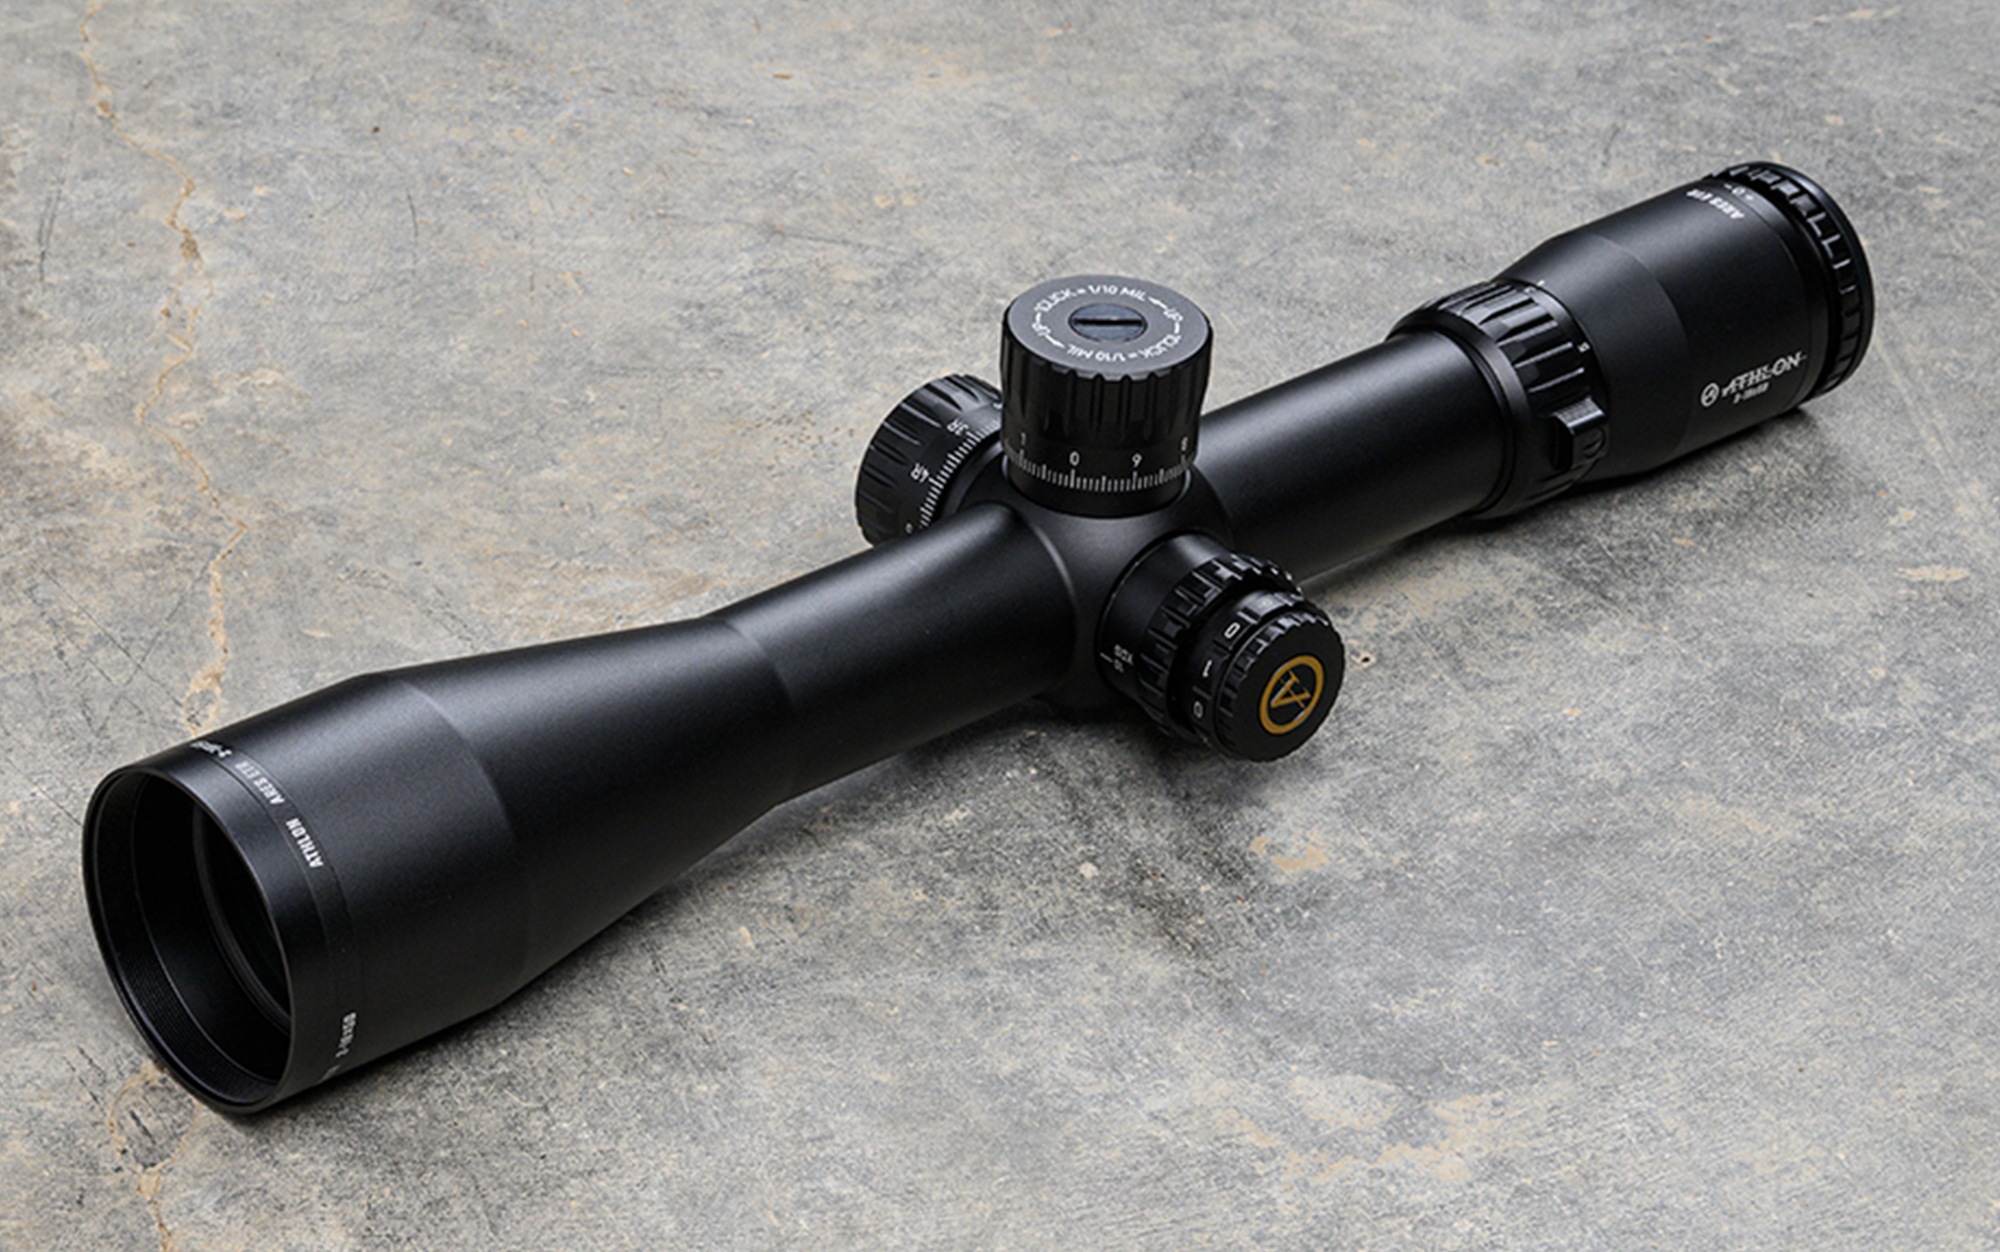 The Athlon Ares ETR UHD is a 3-18x50 precision rifle scope.